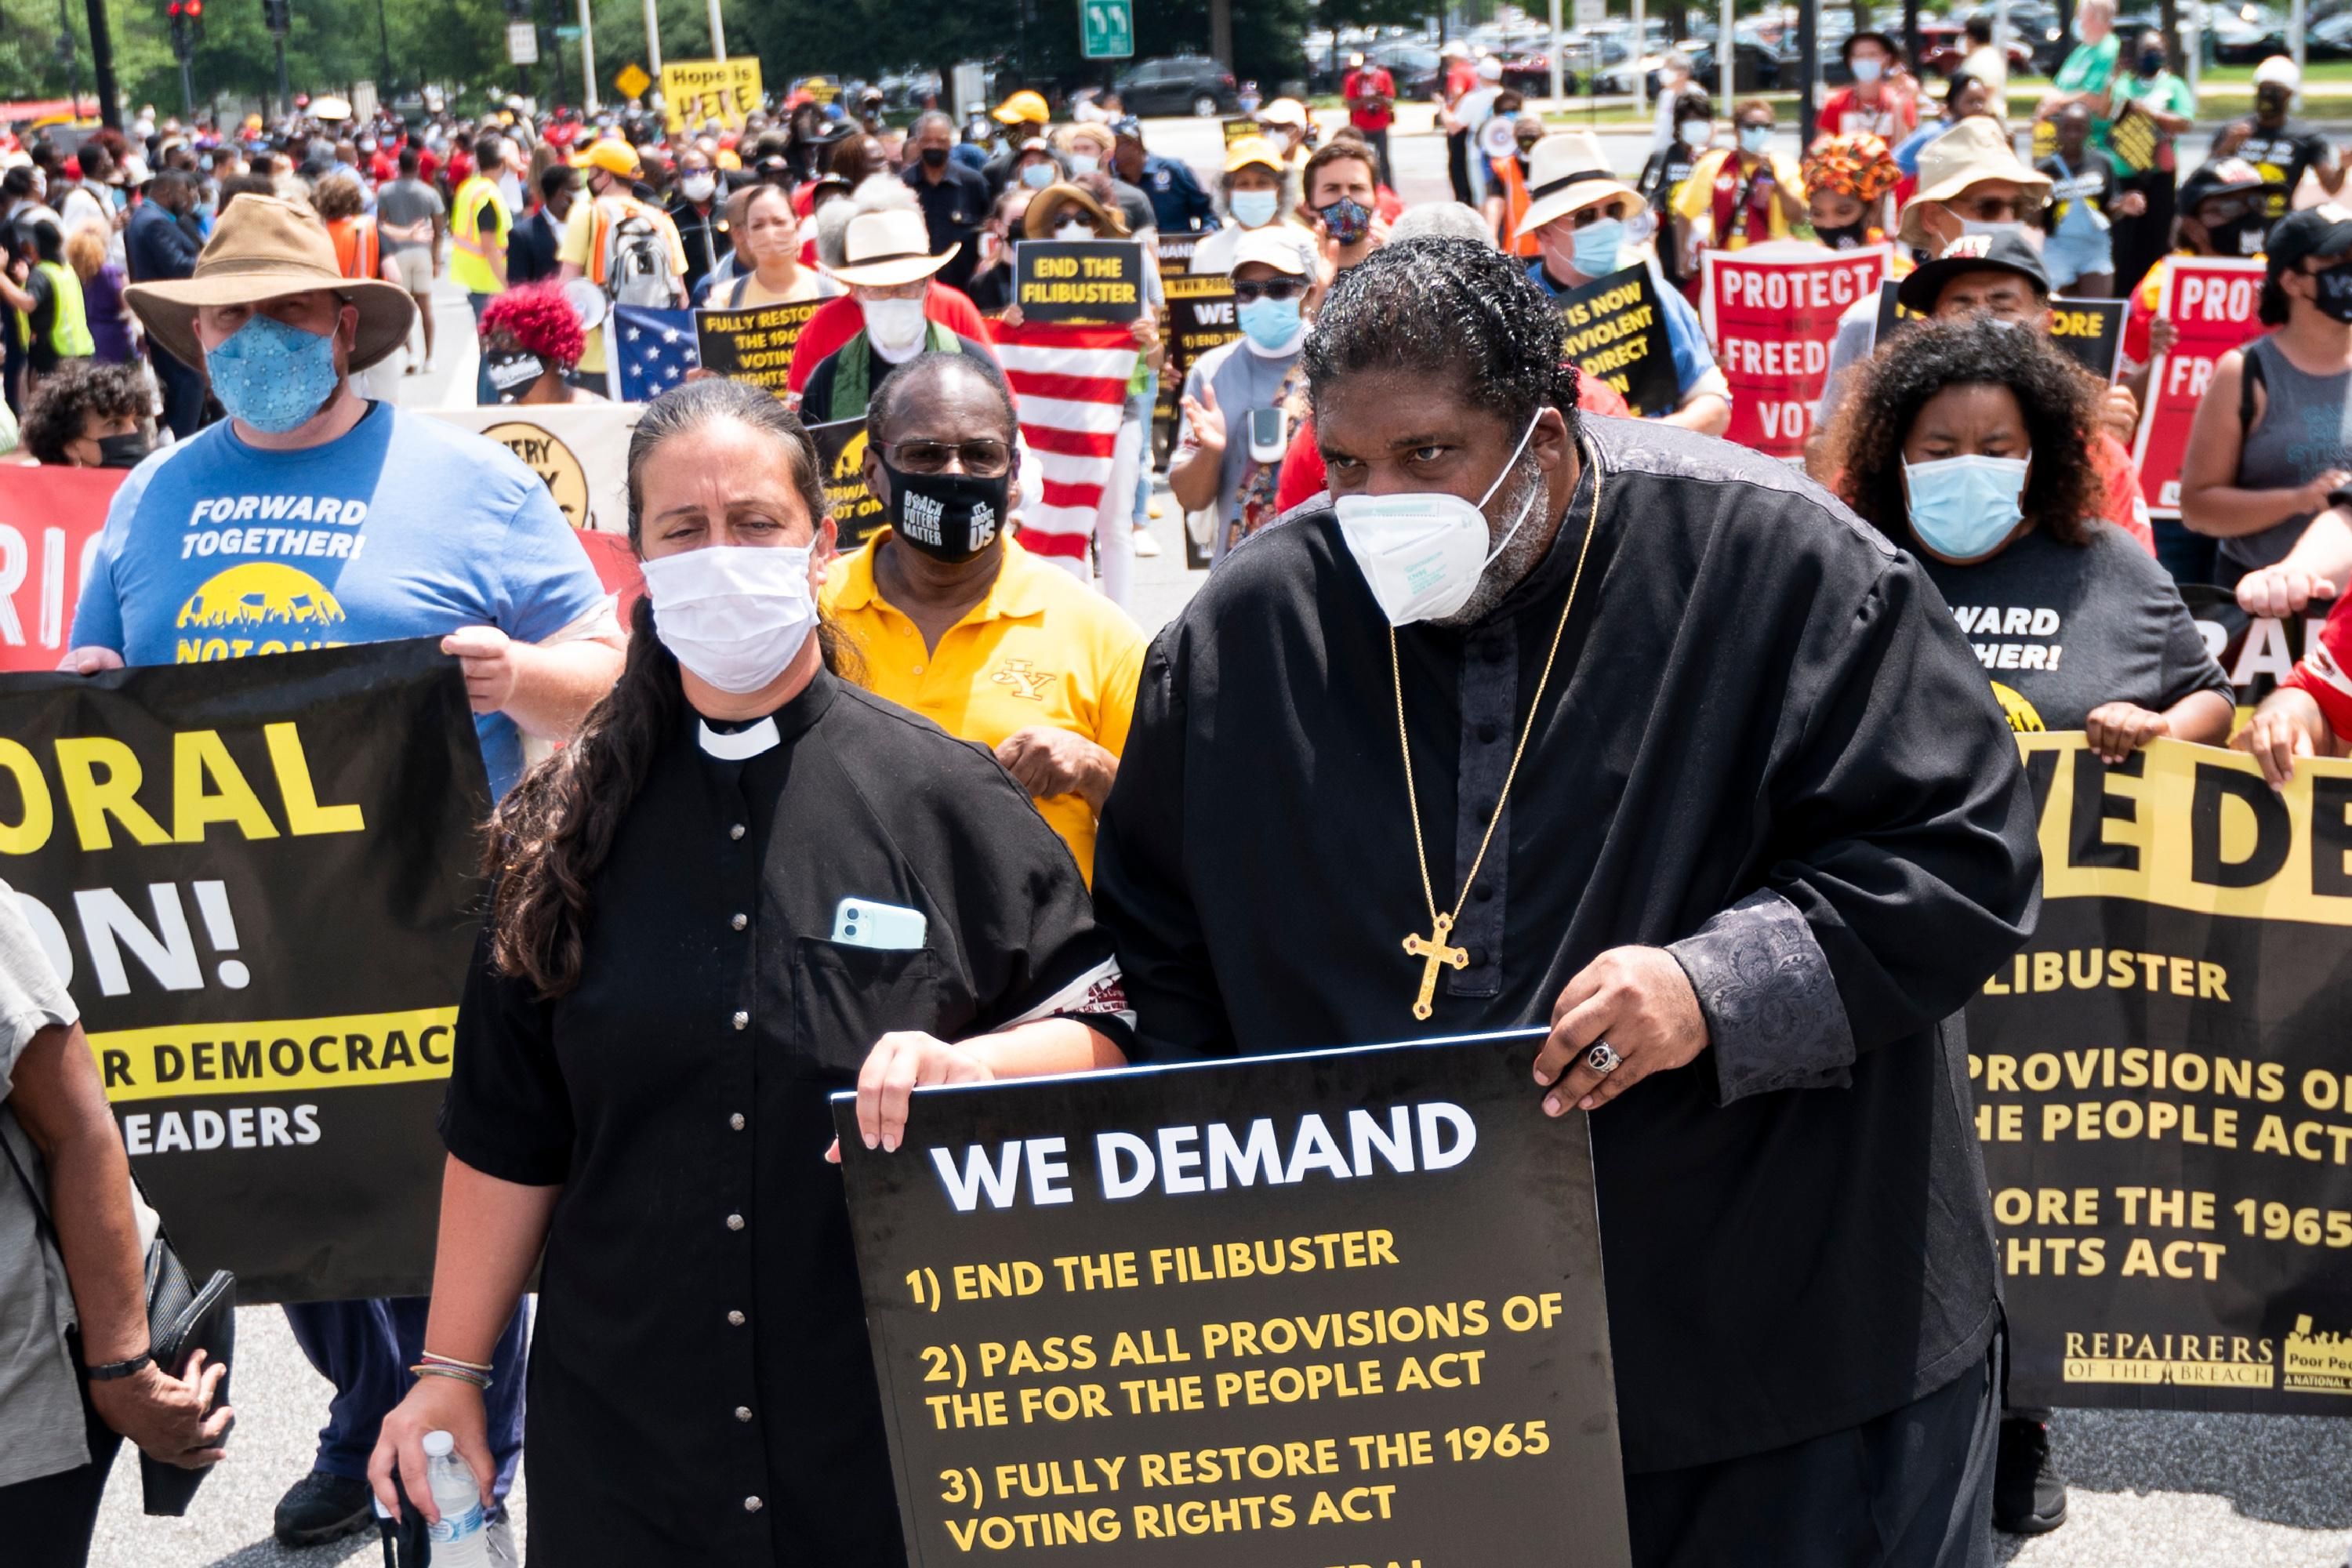 Rev. Dr. William J. Barber and Rev. Dr. Liz Theoharis lead a march in Washington, D.C.